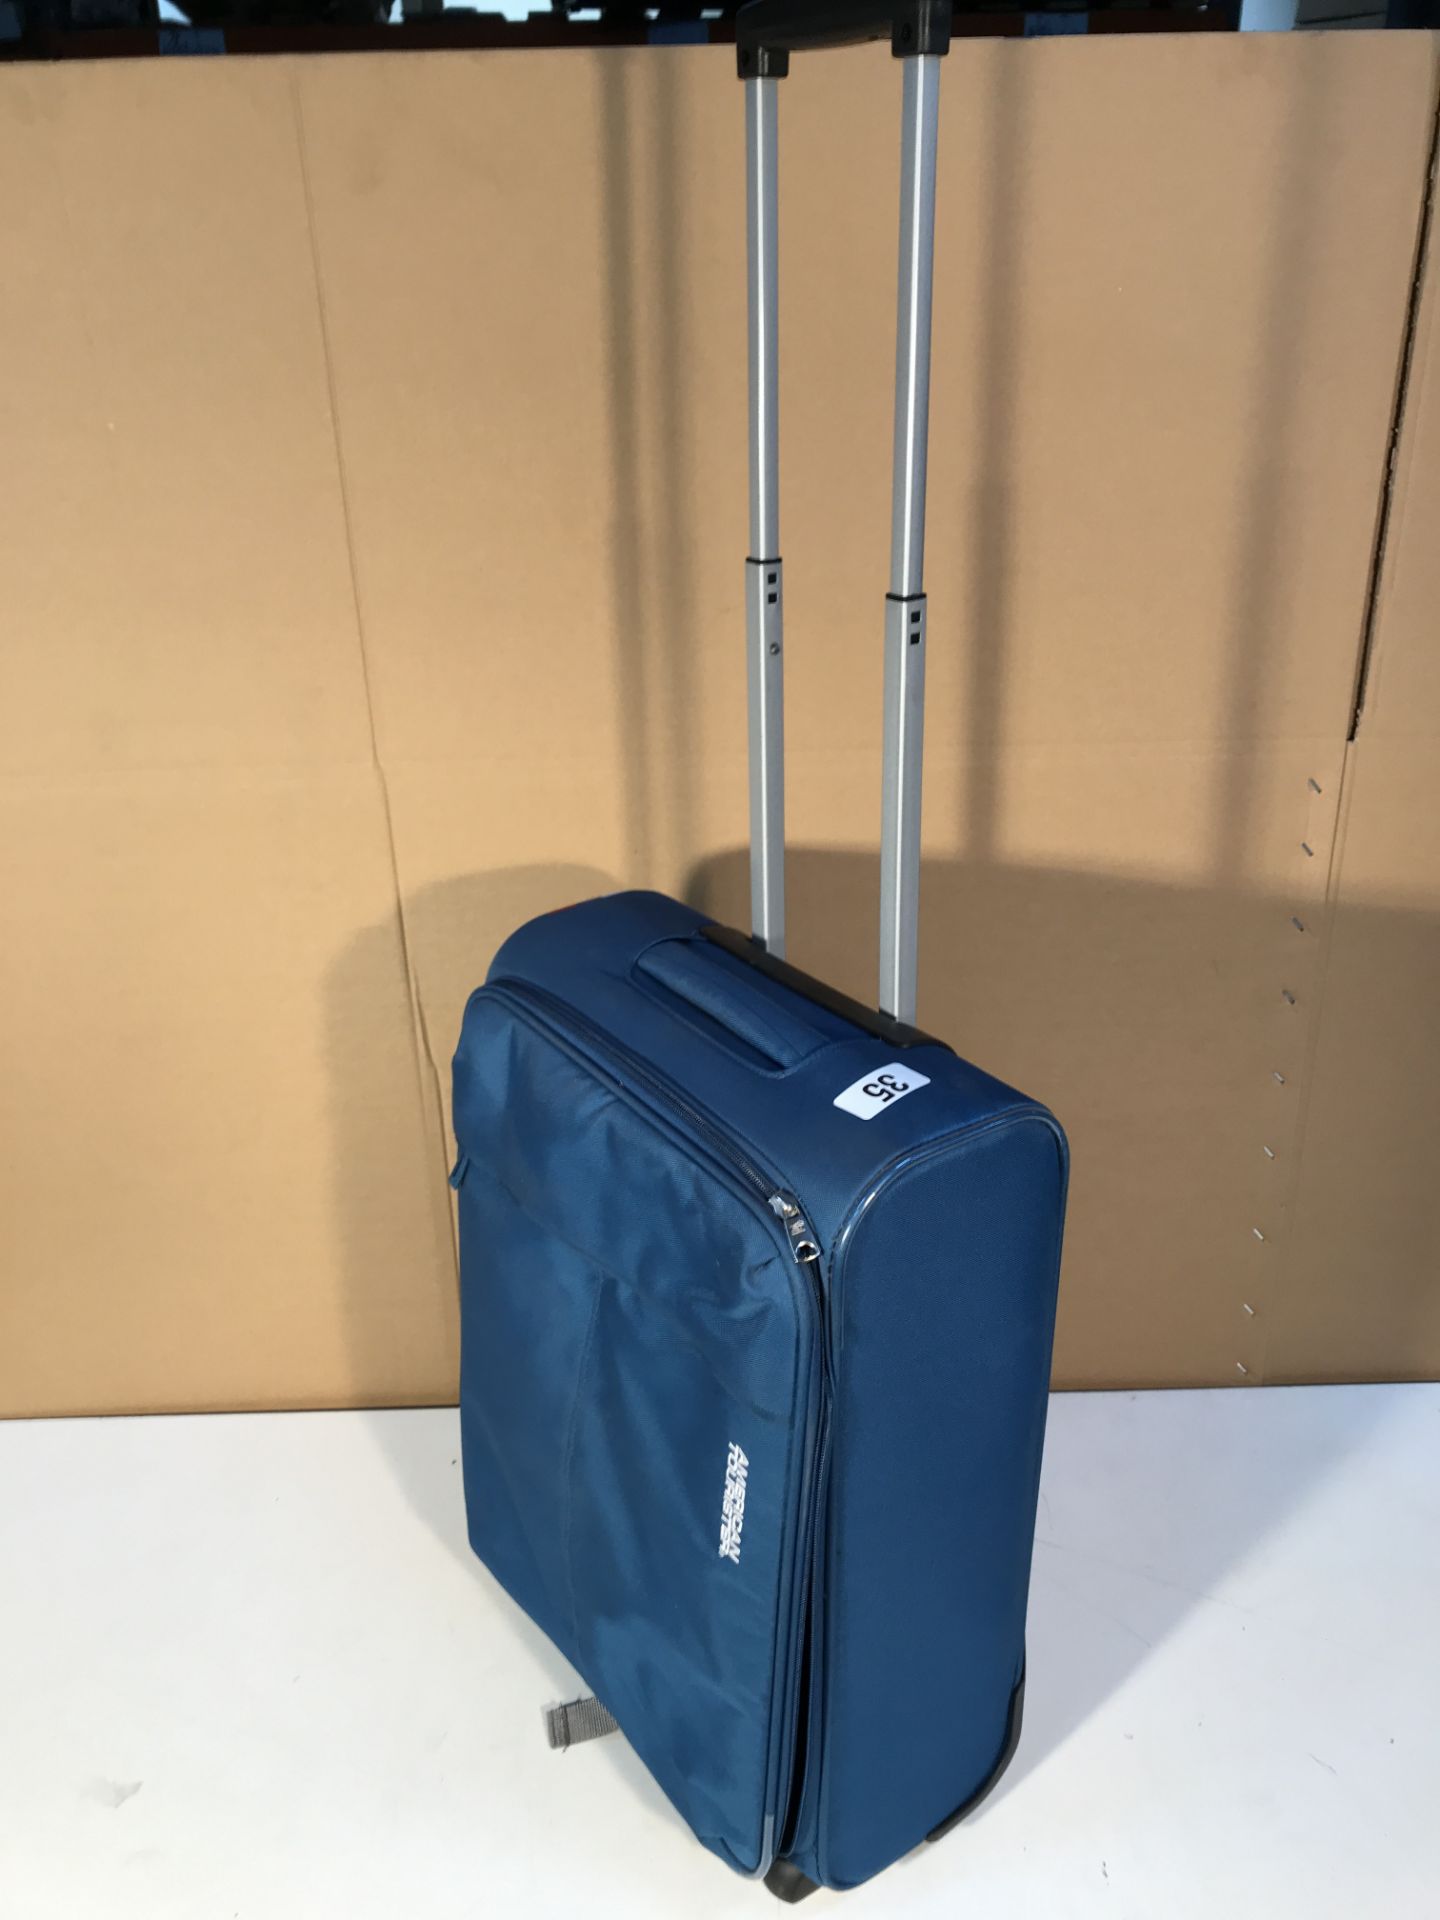 American Tourister Suit Case - Image 4 of 4